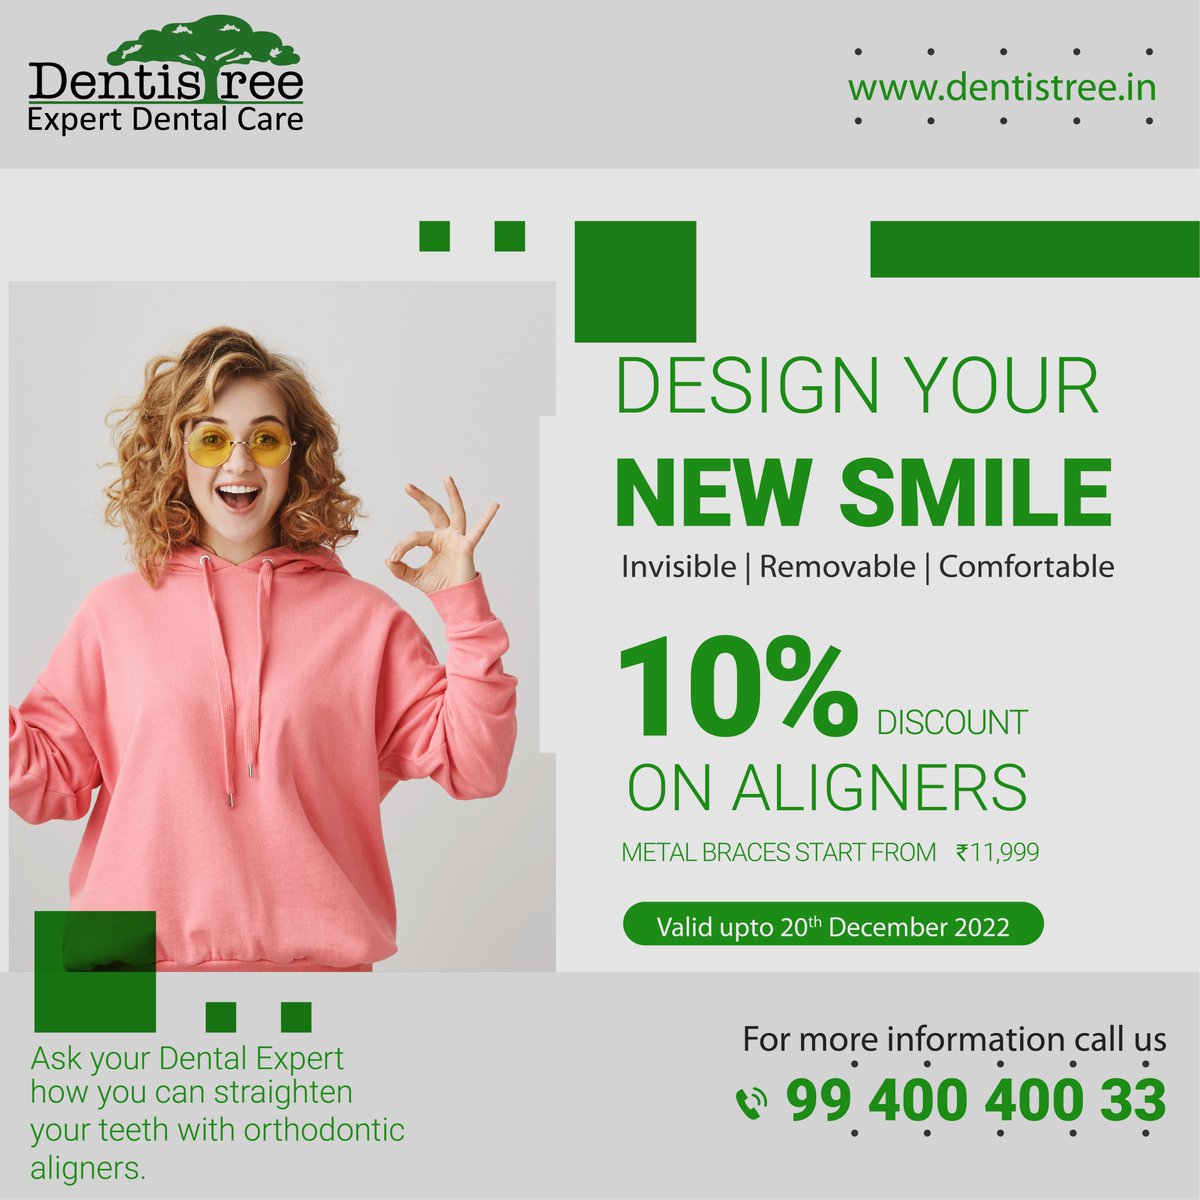 Correct your teeth irregularities,still being in spotlight with Clear Aligners
bit.ly/32MdTvO
Call : +91 99400 40033
#clearskies #clearskys #clearaligners #clearancefinds #clearskingoals #clearheels